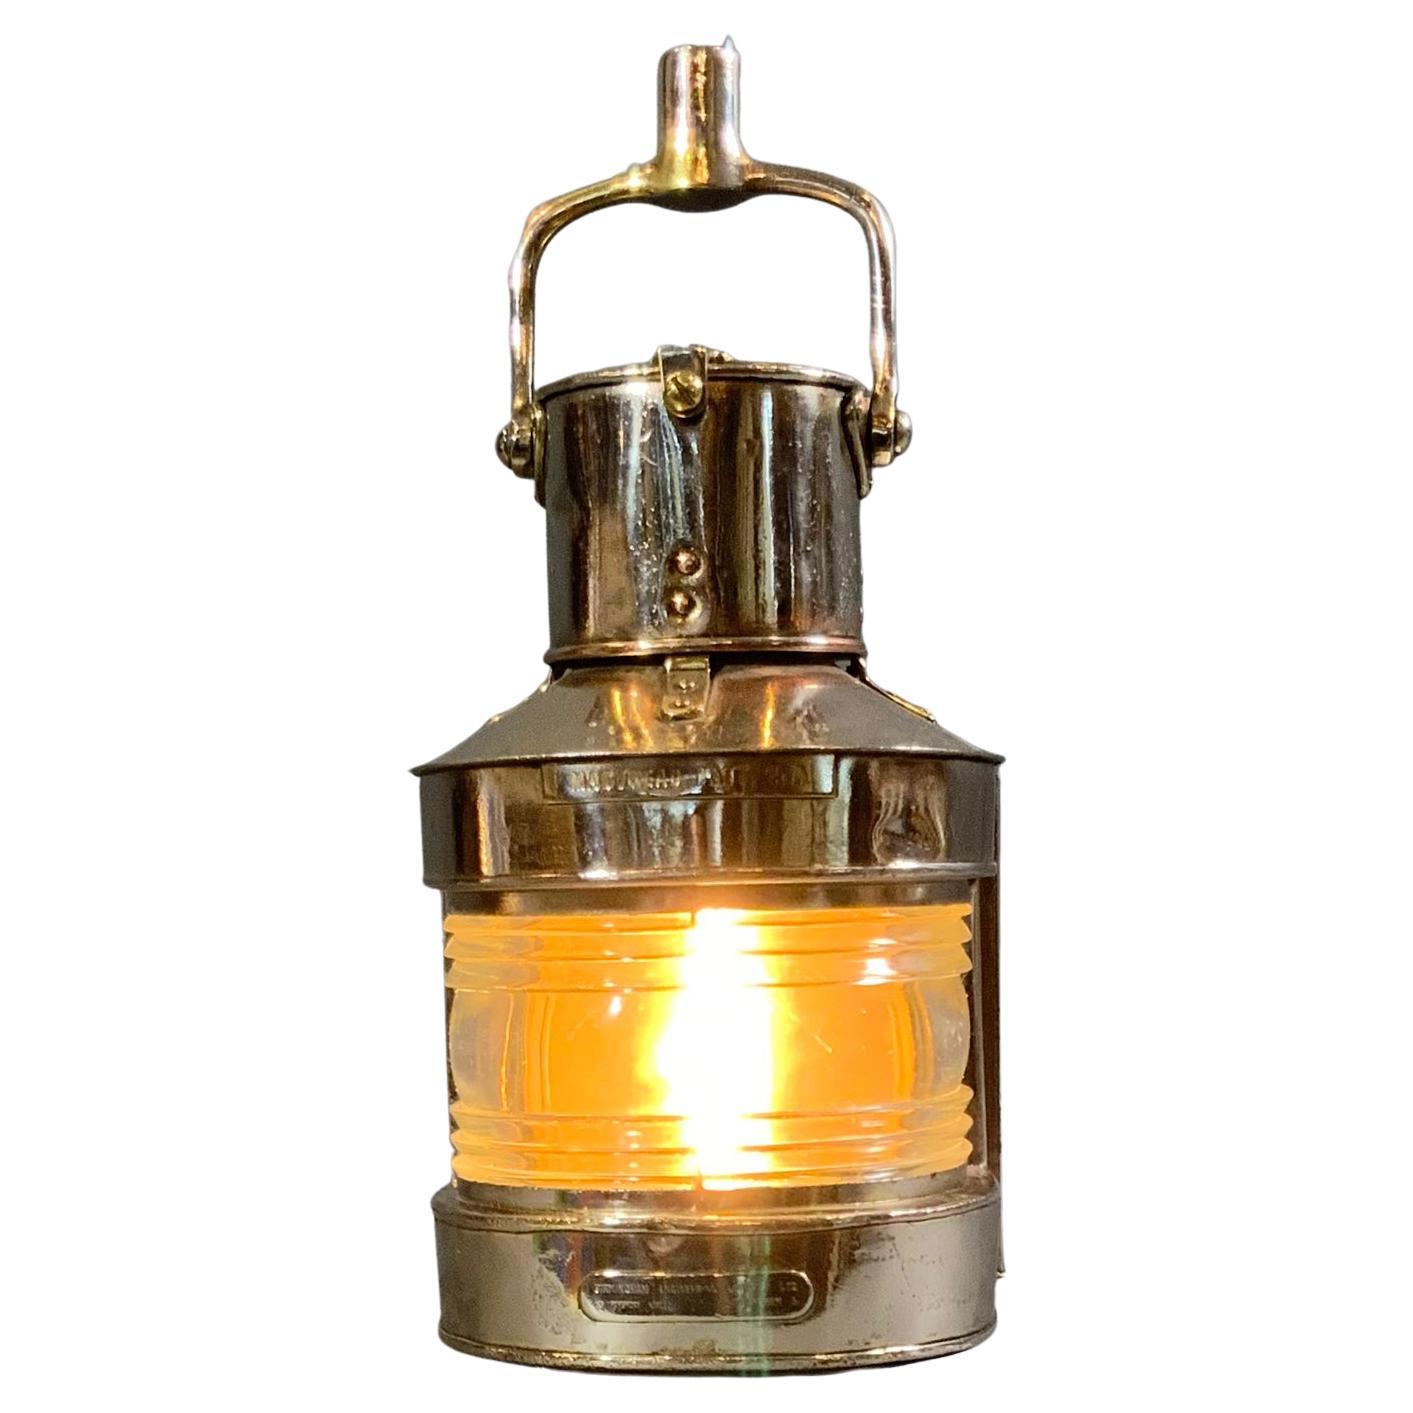 Ships Masthead Lantern by English Maker For Sale